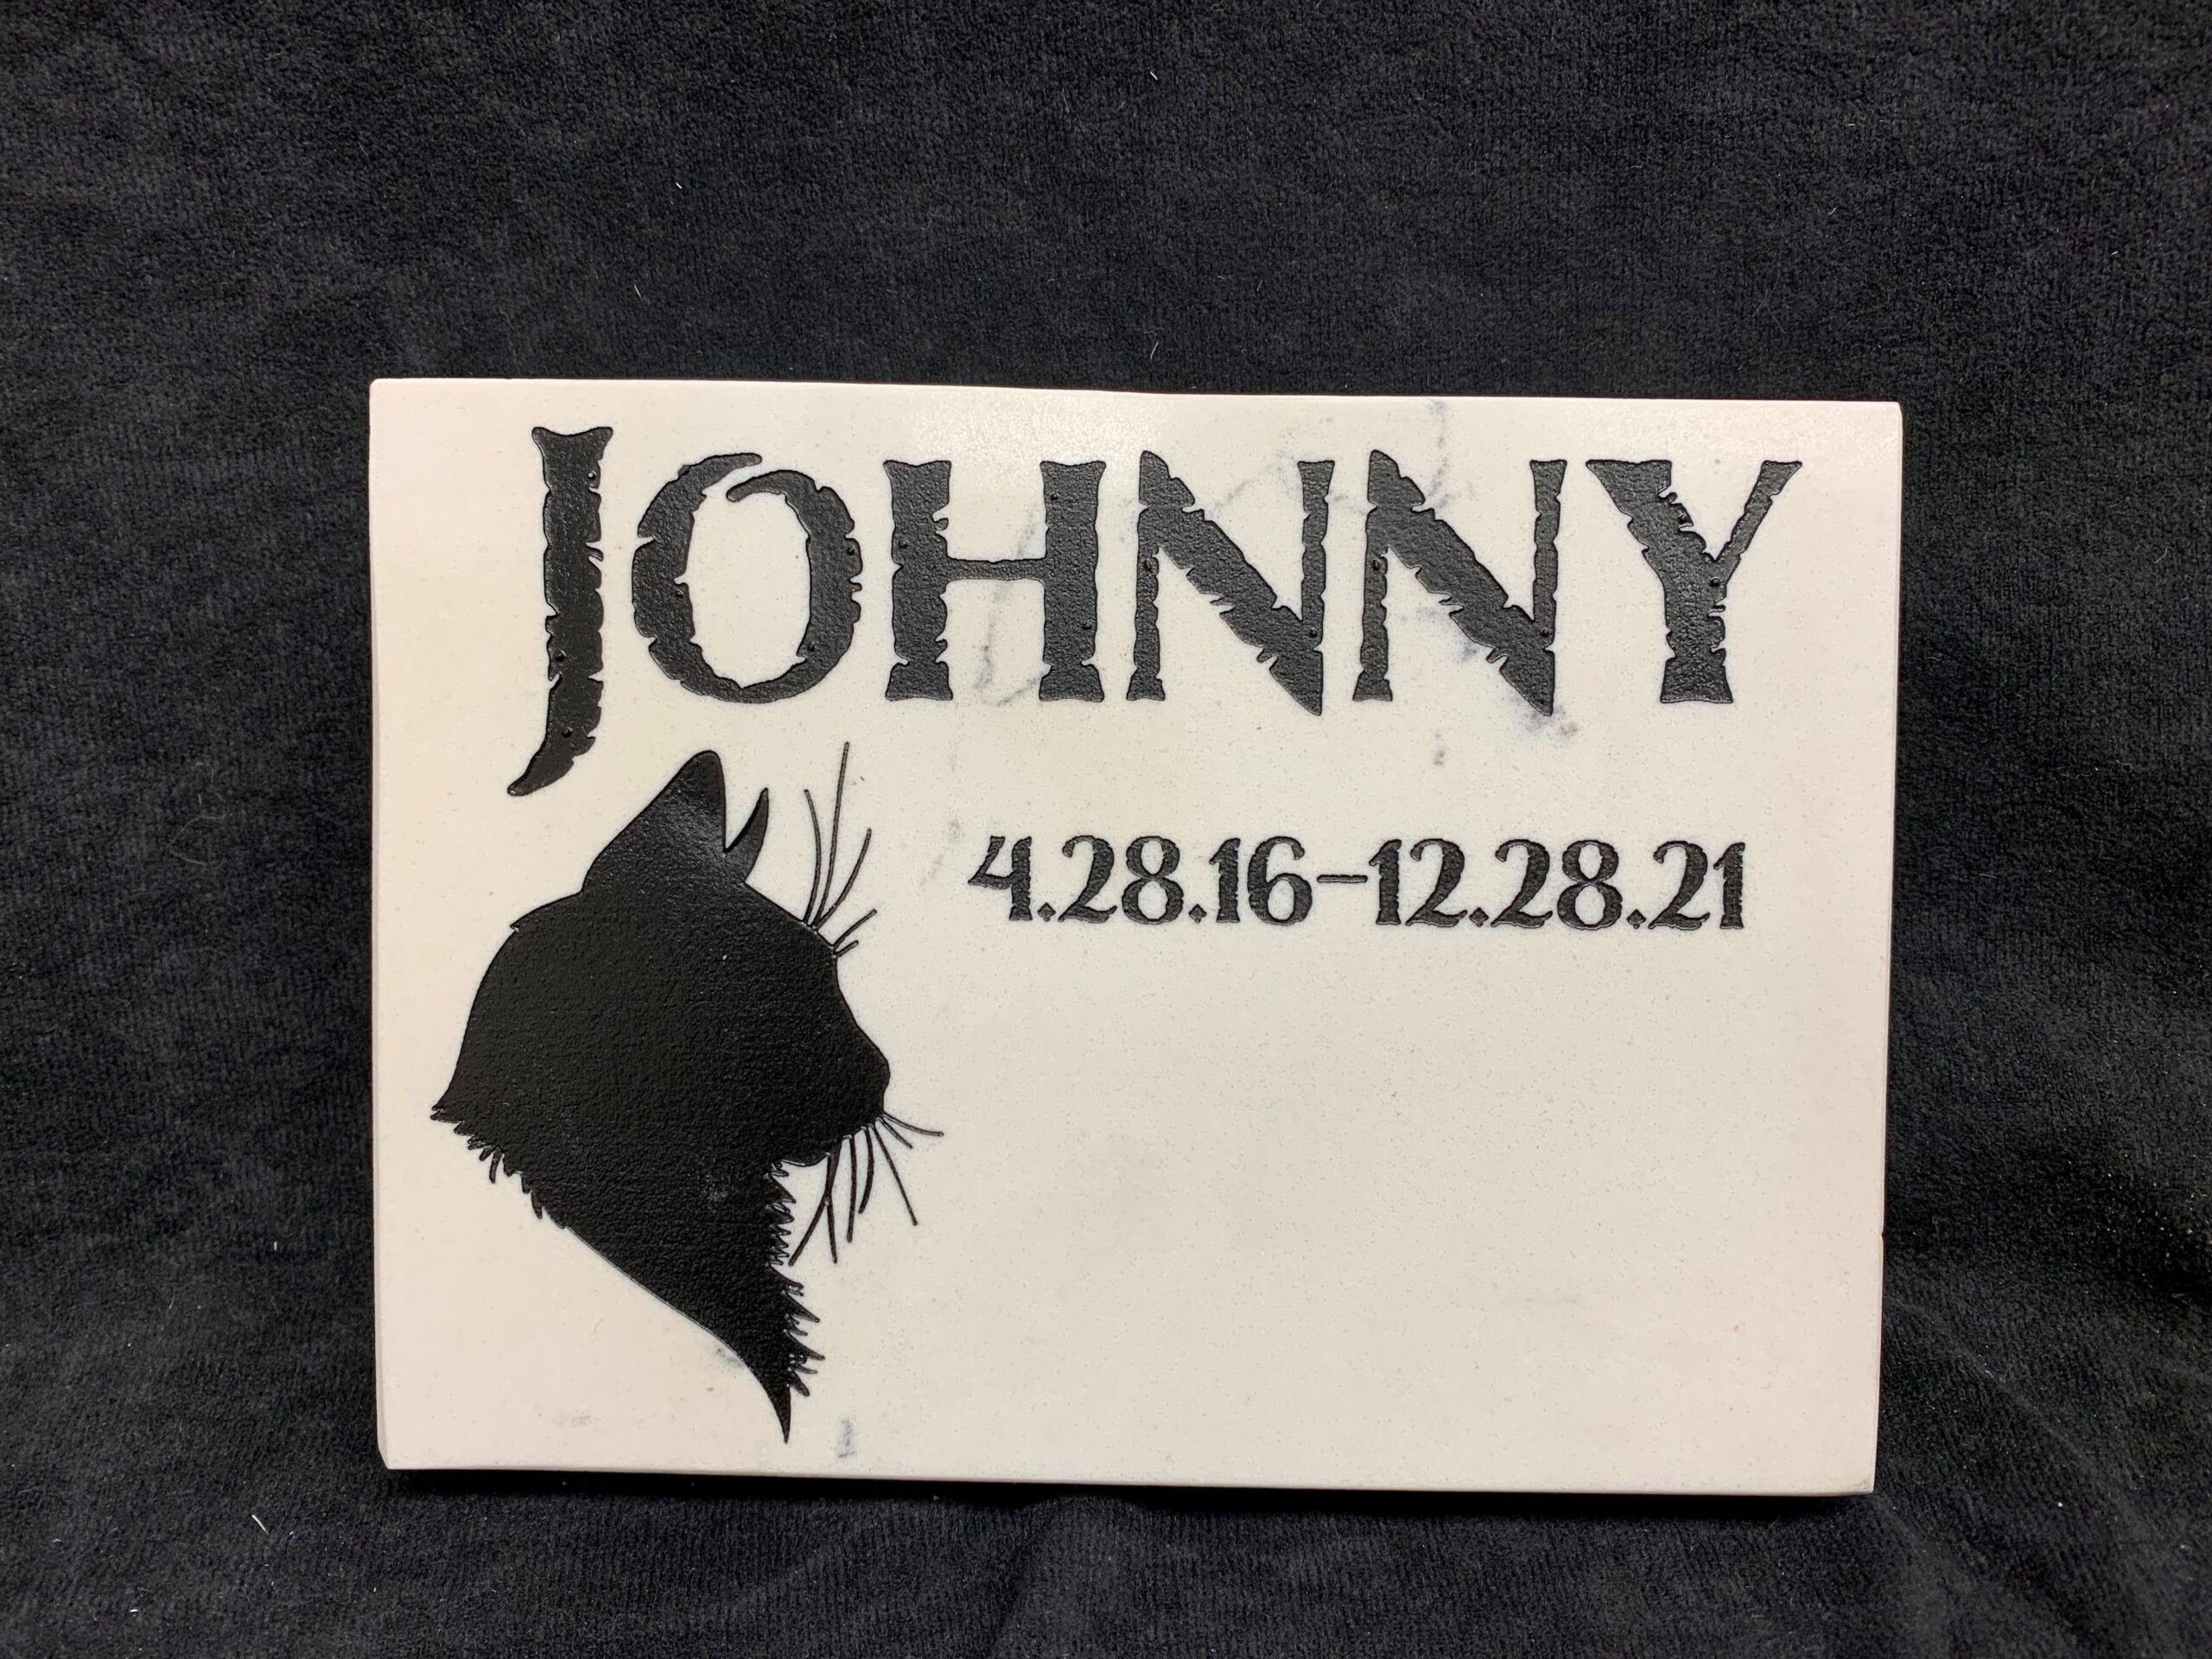 Pet headstone with a black carving of a cat and text that reads Johnny 4.28.16 - 12.28.21